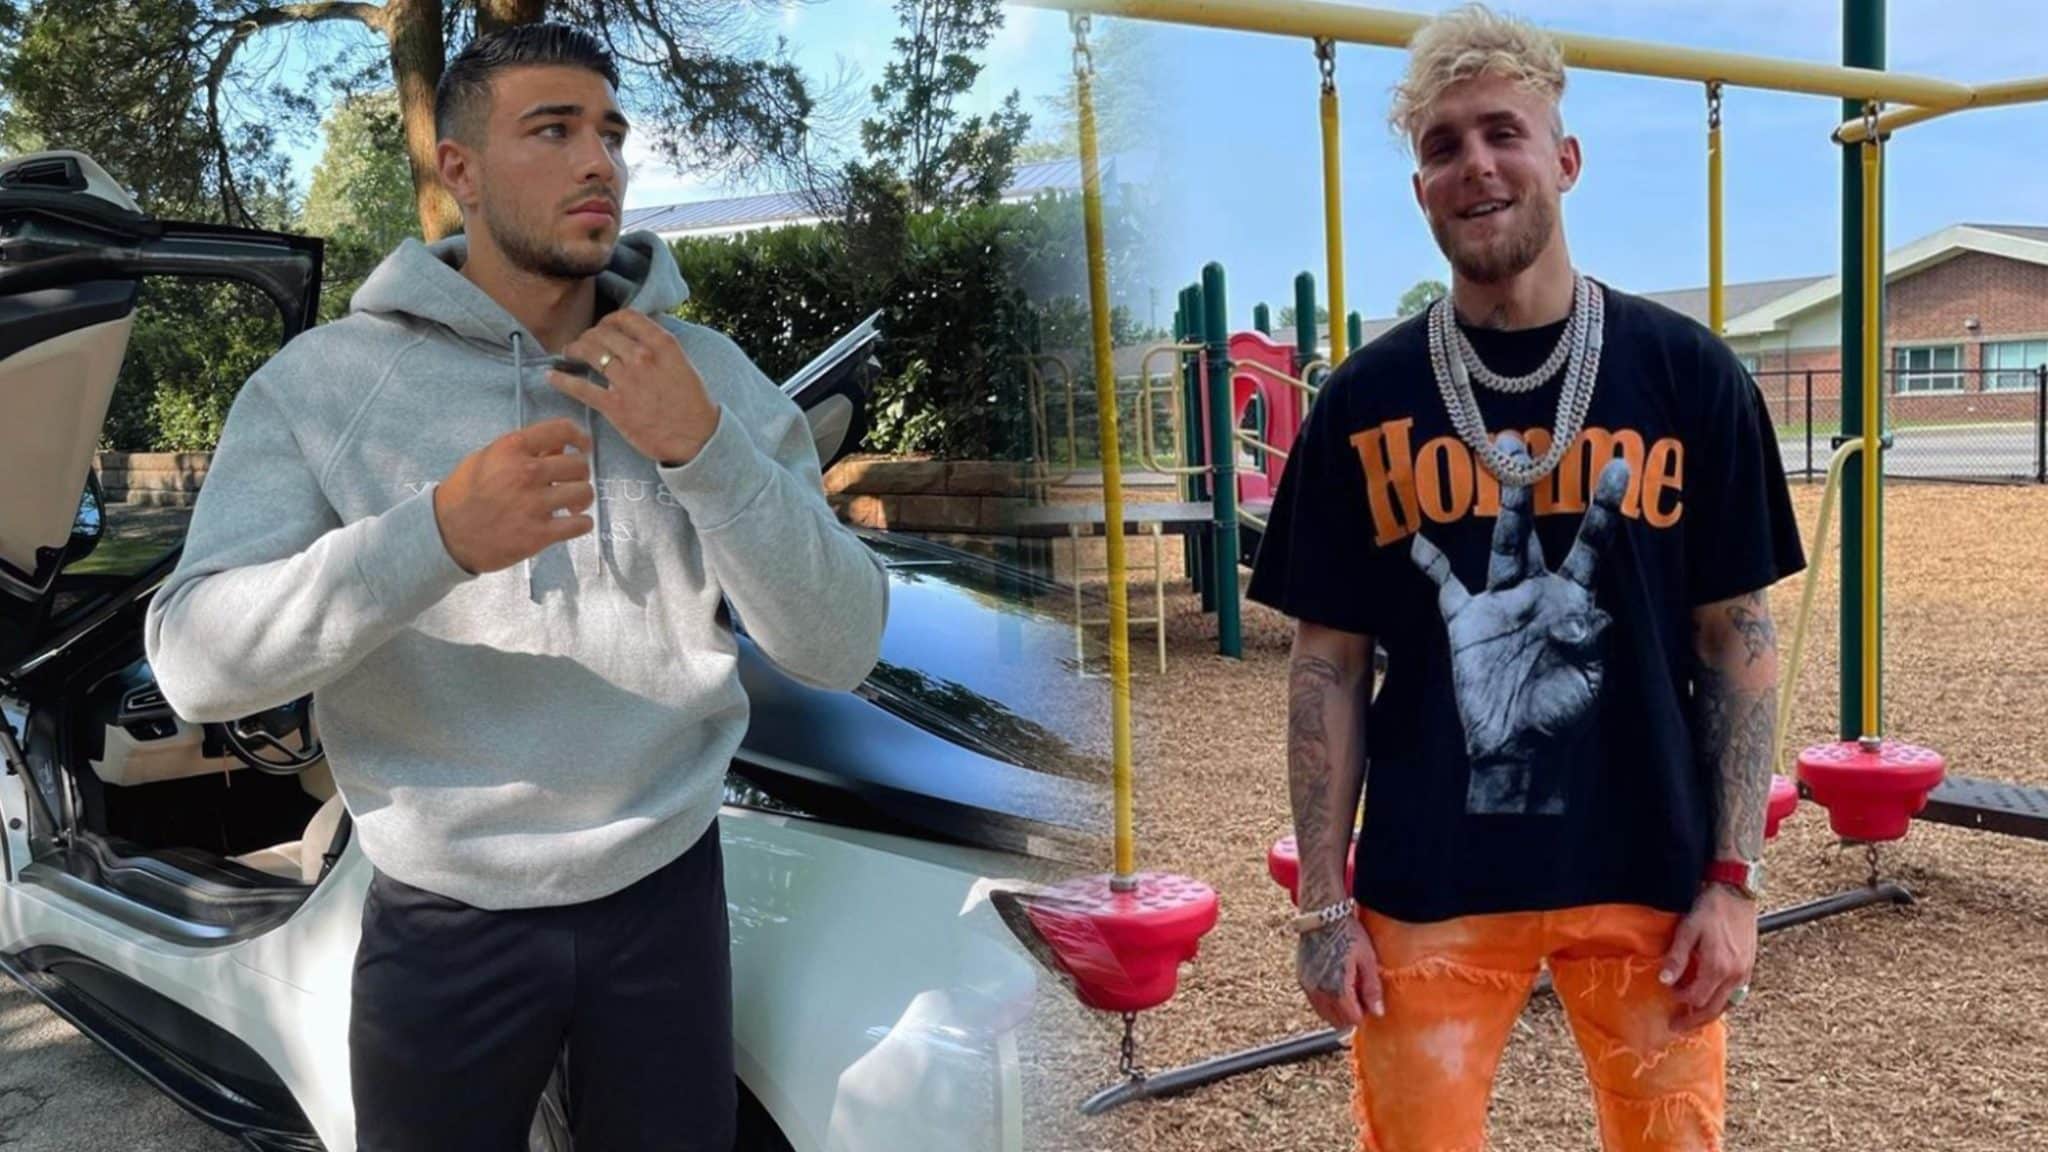 Tommy Fury and Jake Paul posing